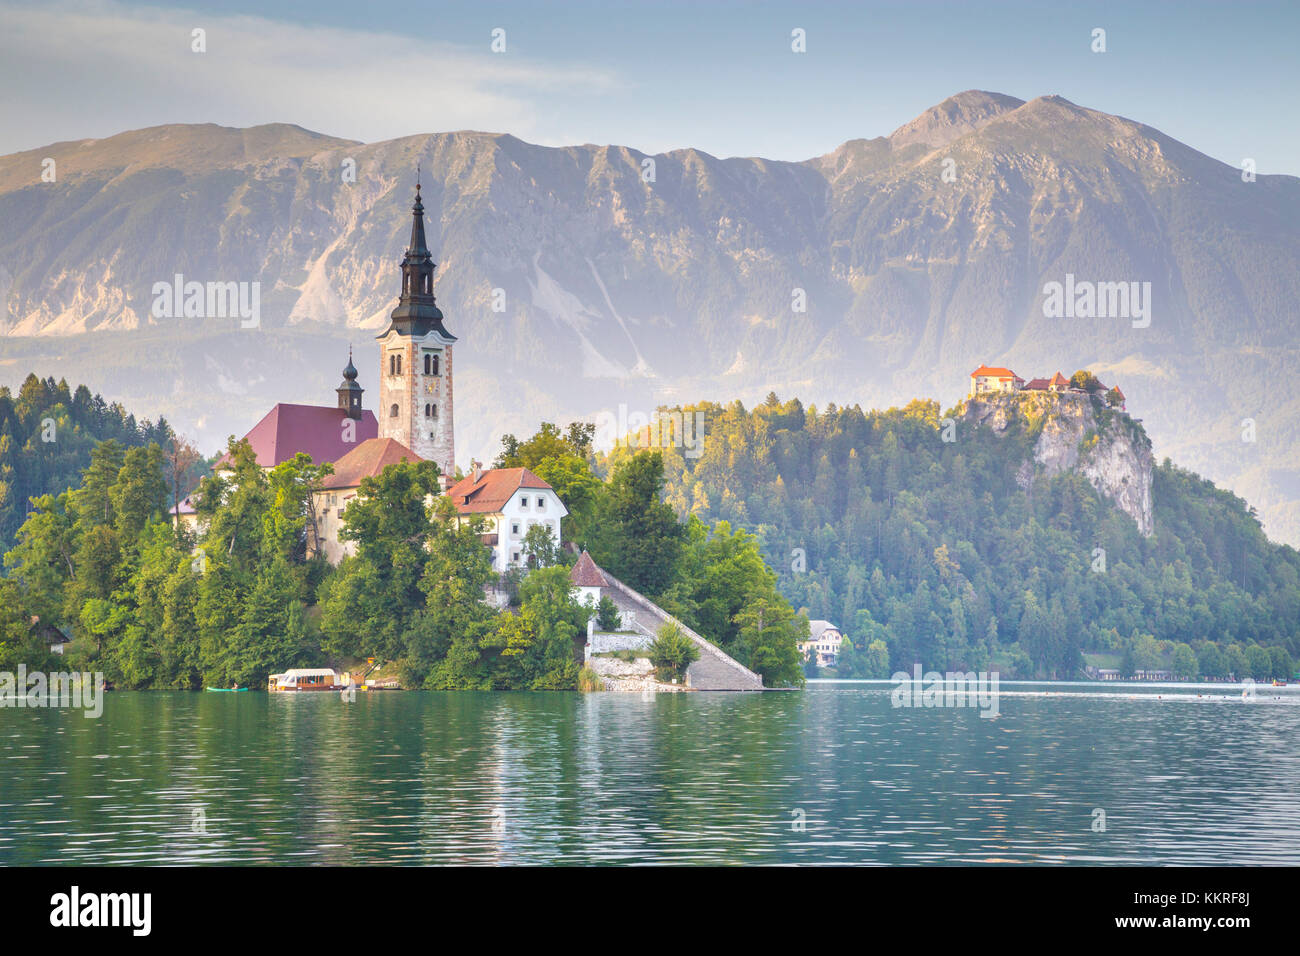 Bled Island and Lake Bled. Bled, Upper Carniolan region, Slovenia. Stock Photo